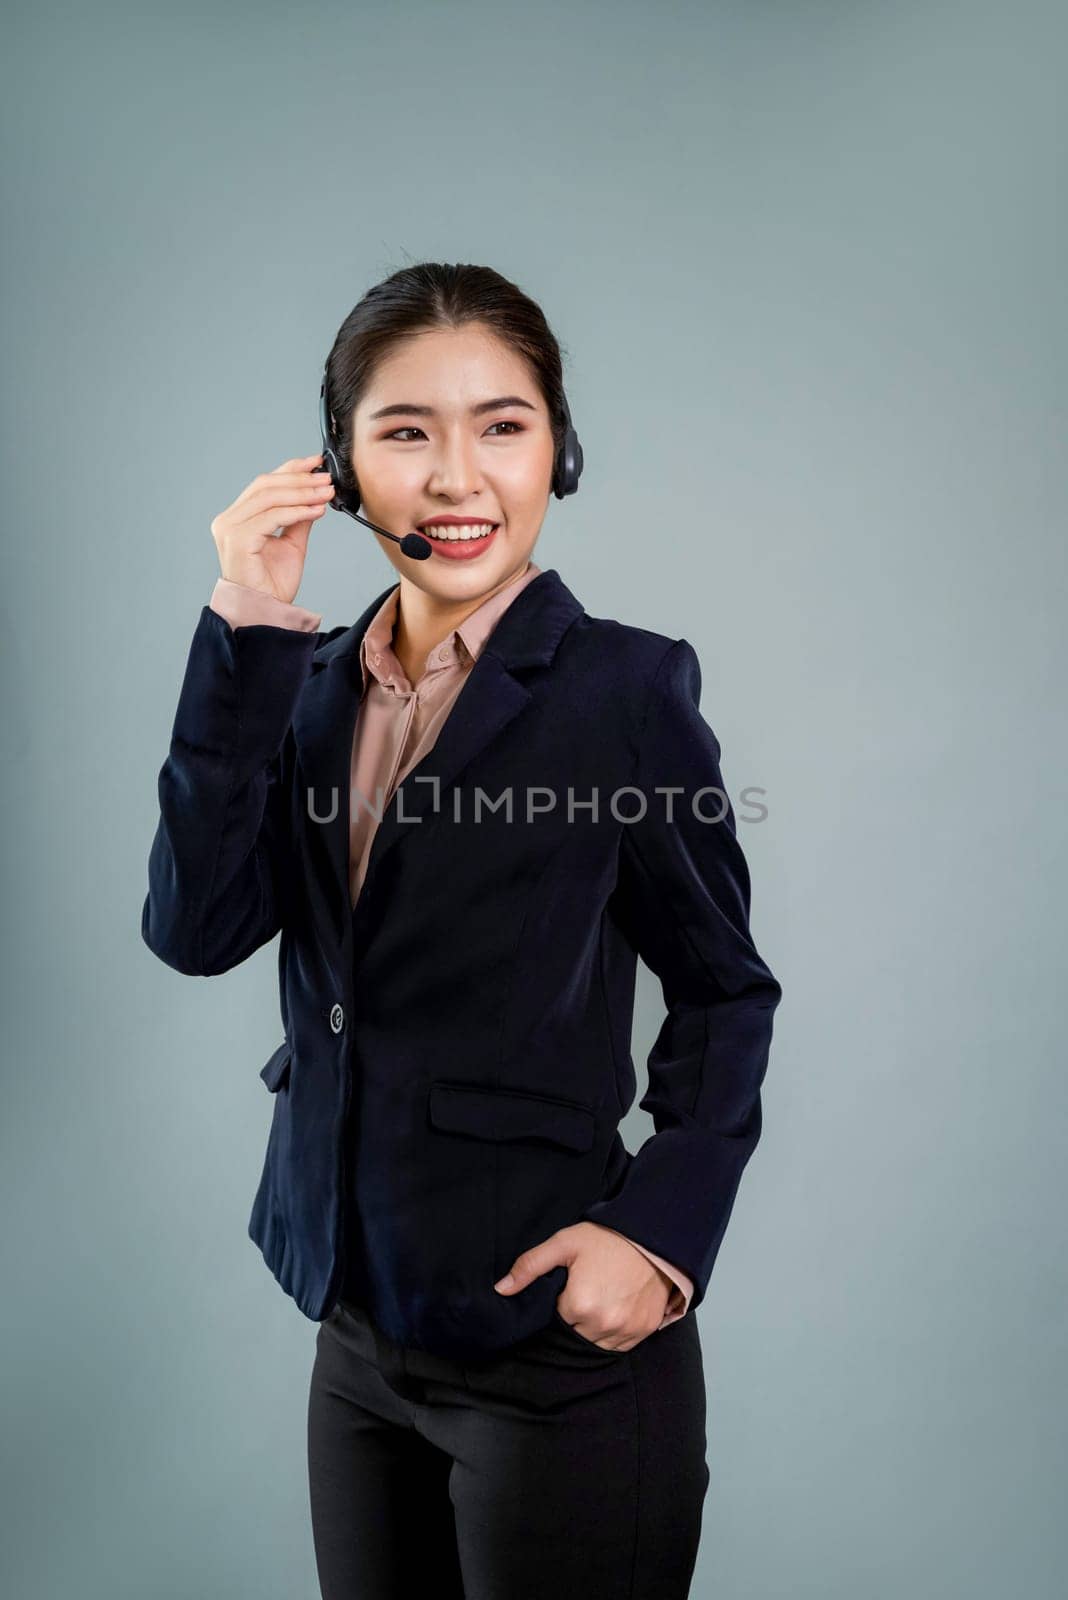 Attractive Asian operator with formal suit and headset. Enthusiastic by biancoblue